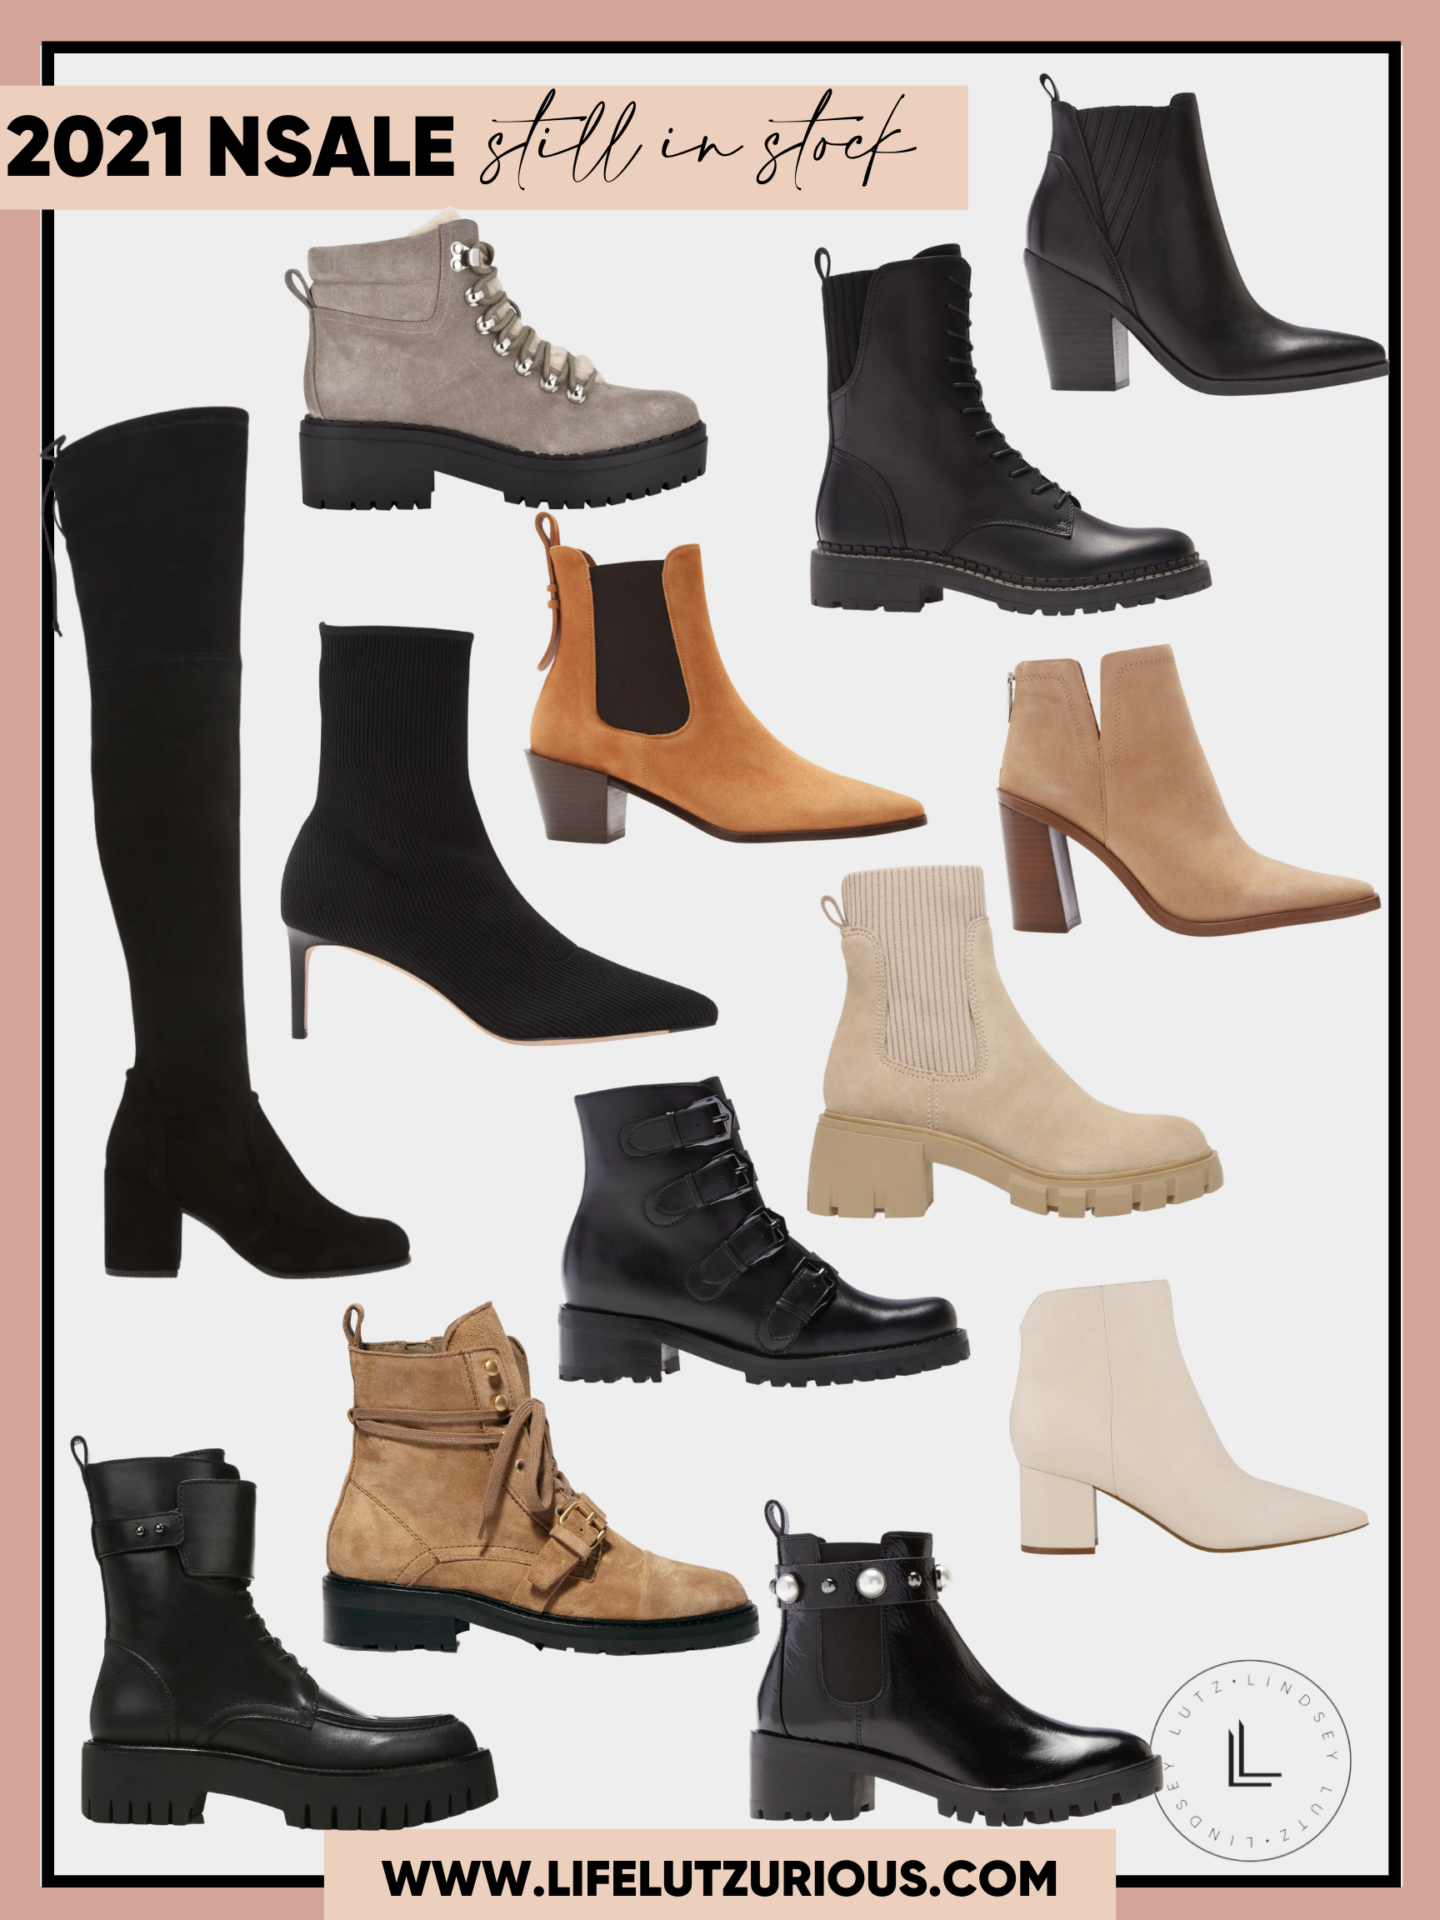 NORDSTROM BOOTS IN STOCK